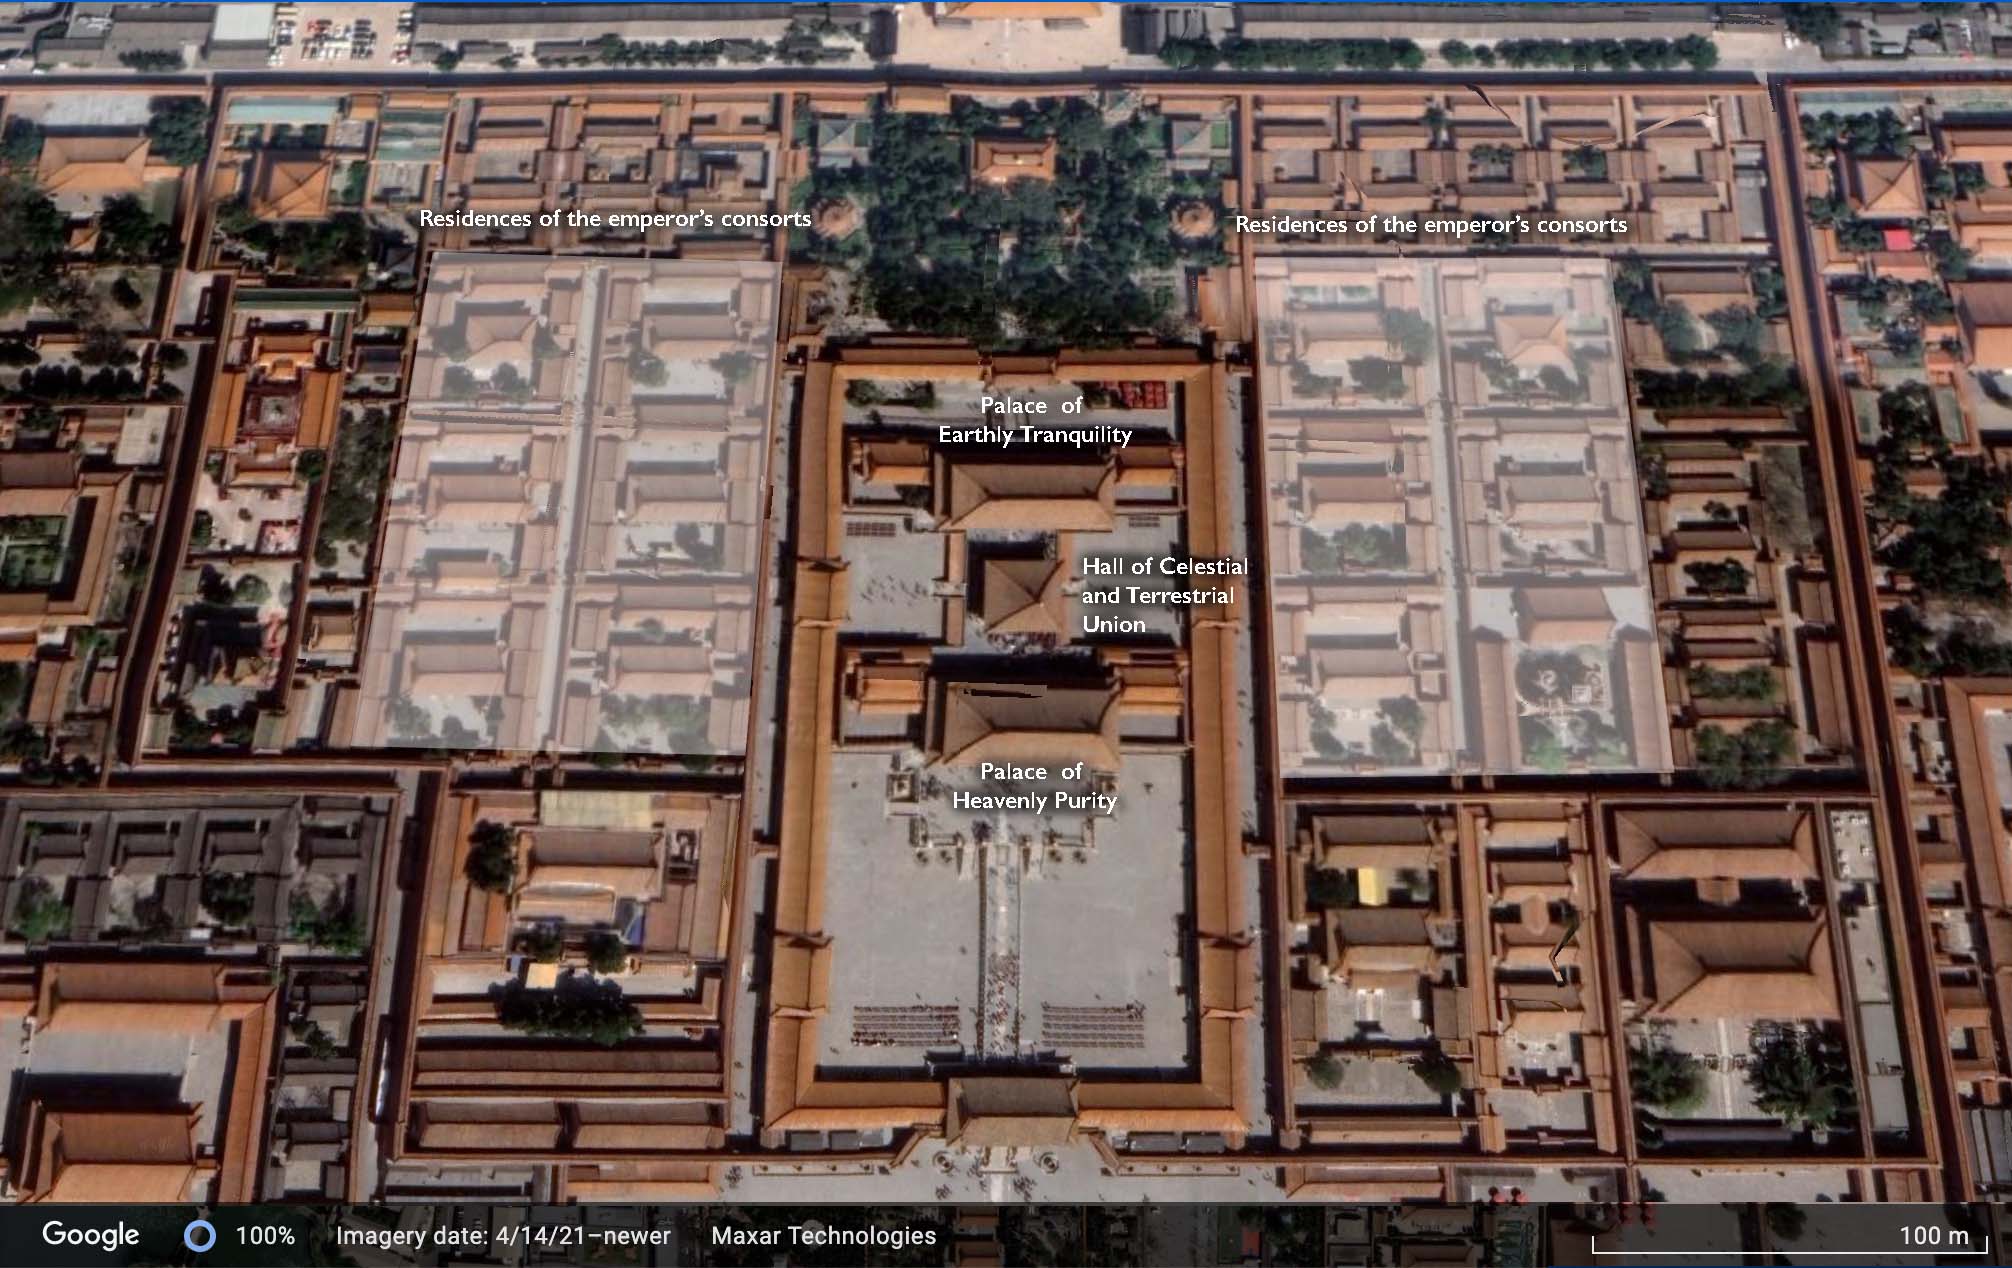 Interior court showing the Palace of Celestial Purity, the Hall of Celestial and Terrestrial Union, the Palace of Earthly Tranquility, and residences for the emperor's consorts (map © Google Earth 2021)